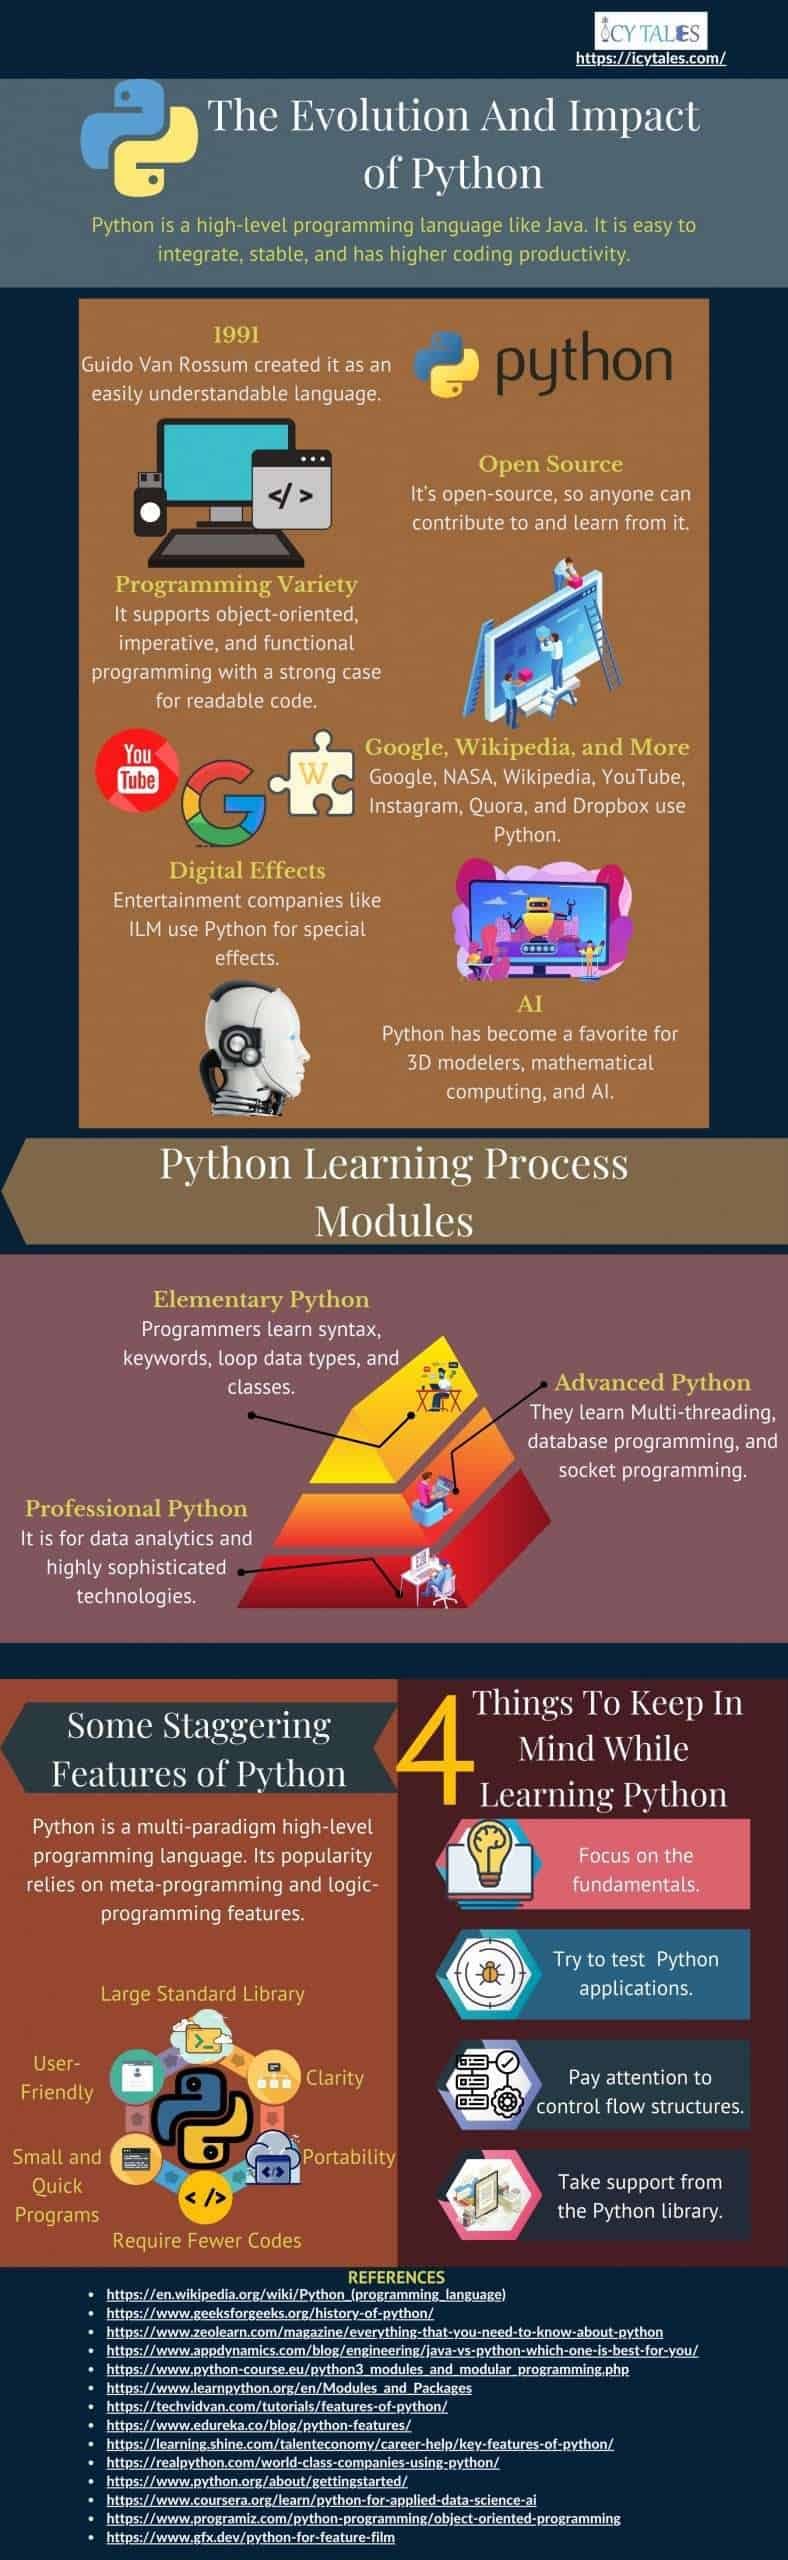 The Evolution And Impact of Python